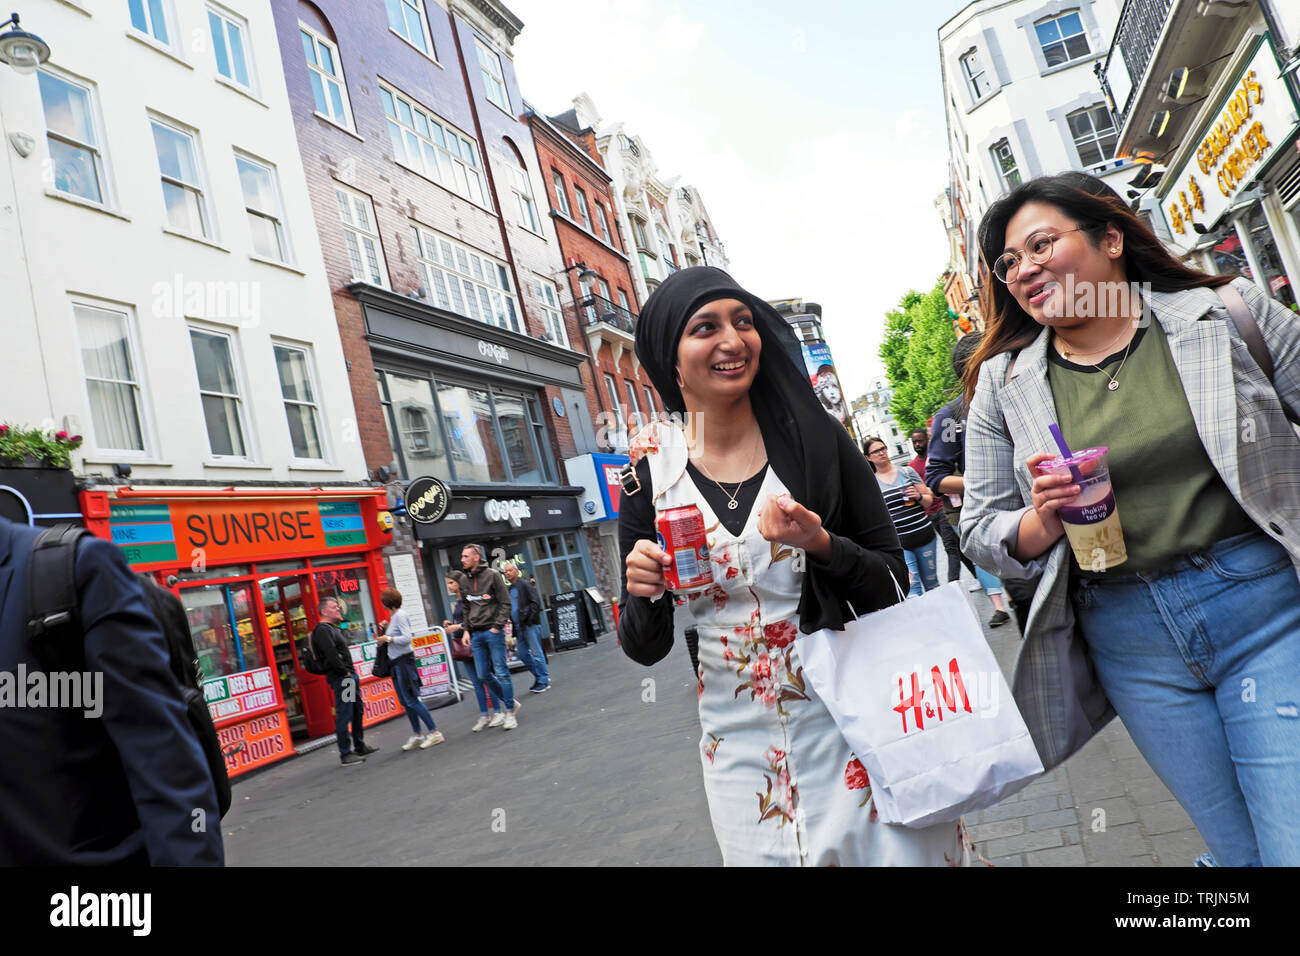 Young women walking, talking and shopping with H&M shopping bag on Gerrard Street in Chinatown London W1 England UK   KATHY DEWITT Stock Photo